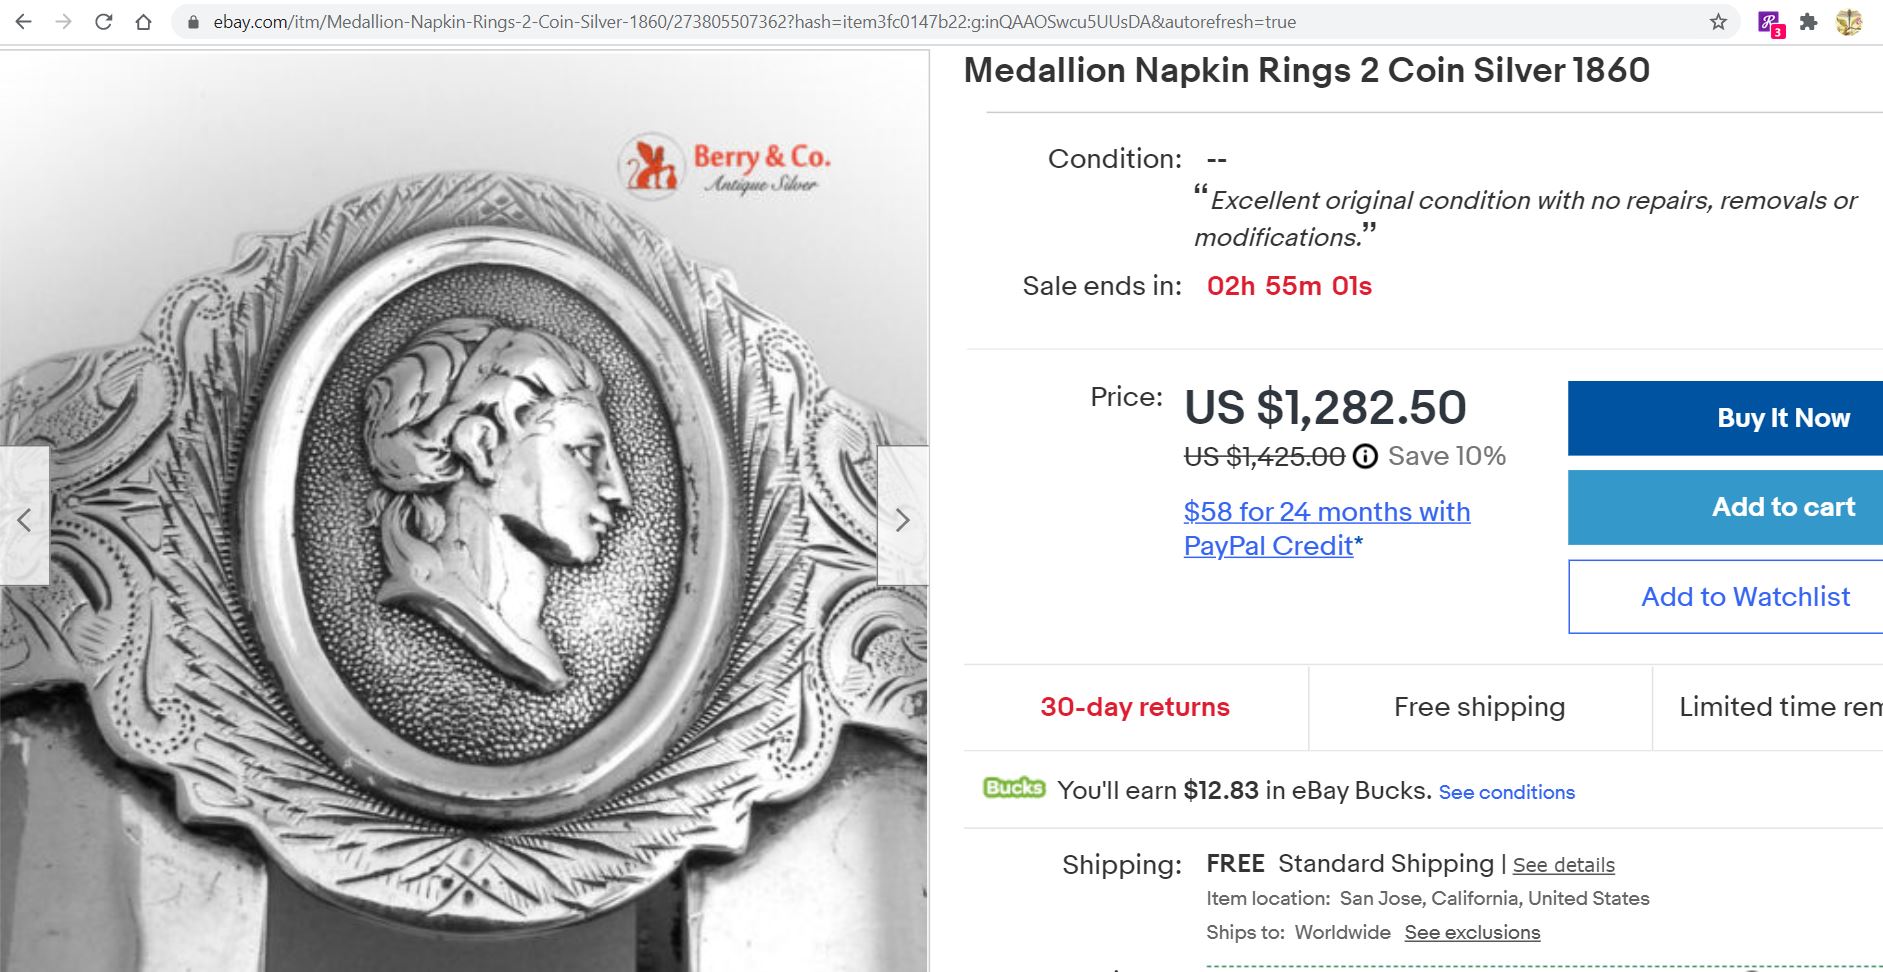 napkin-ring-medallion-pair-on-stands-S.D.BrowerSon-1.JPG